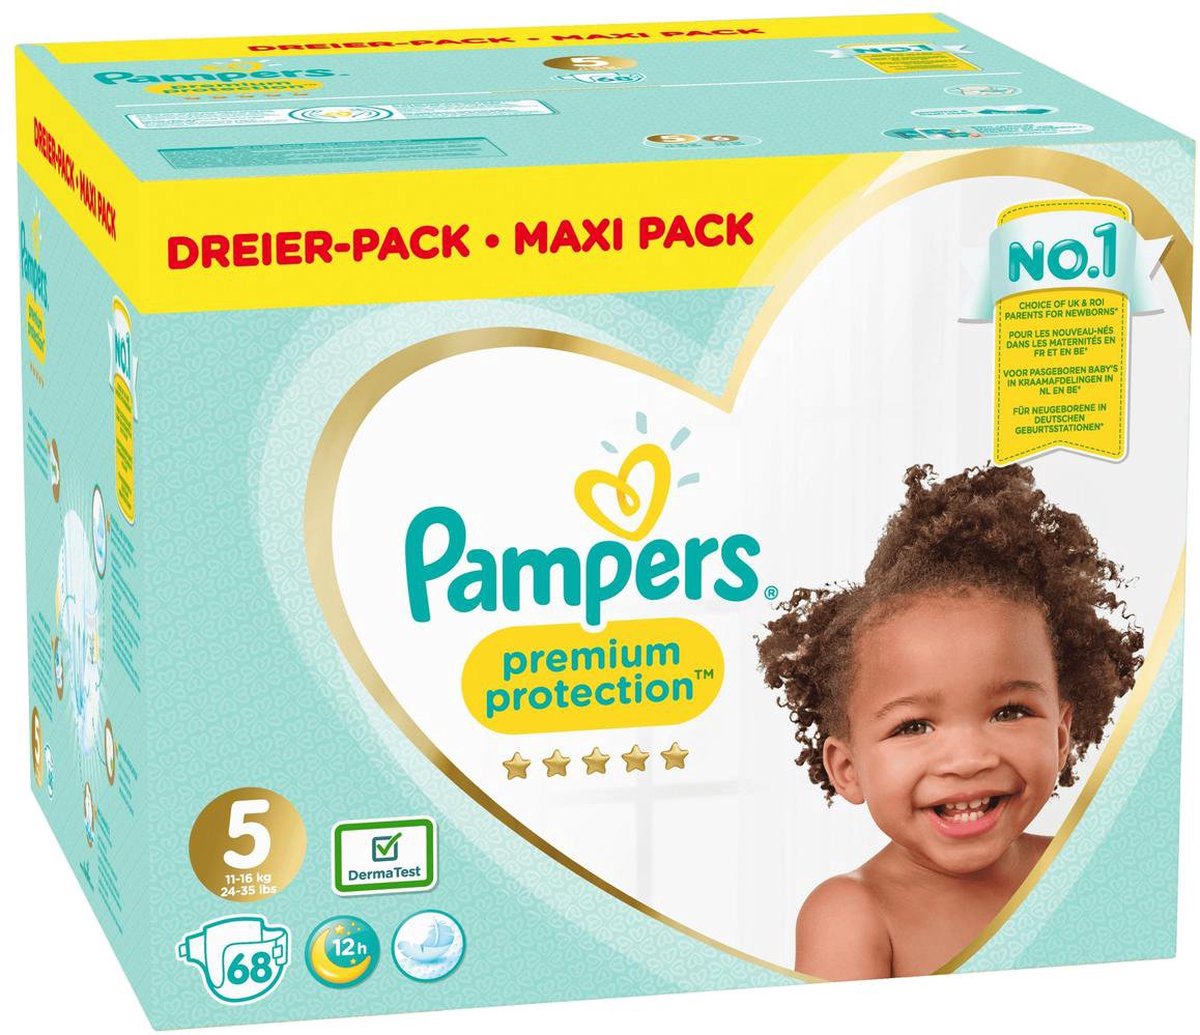 LOT X2 COUCHE TAILLE 6 BABY DRY - Pampers